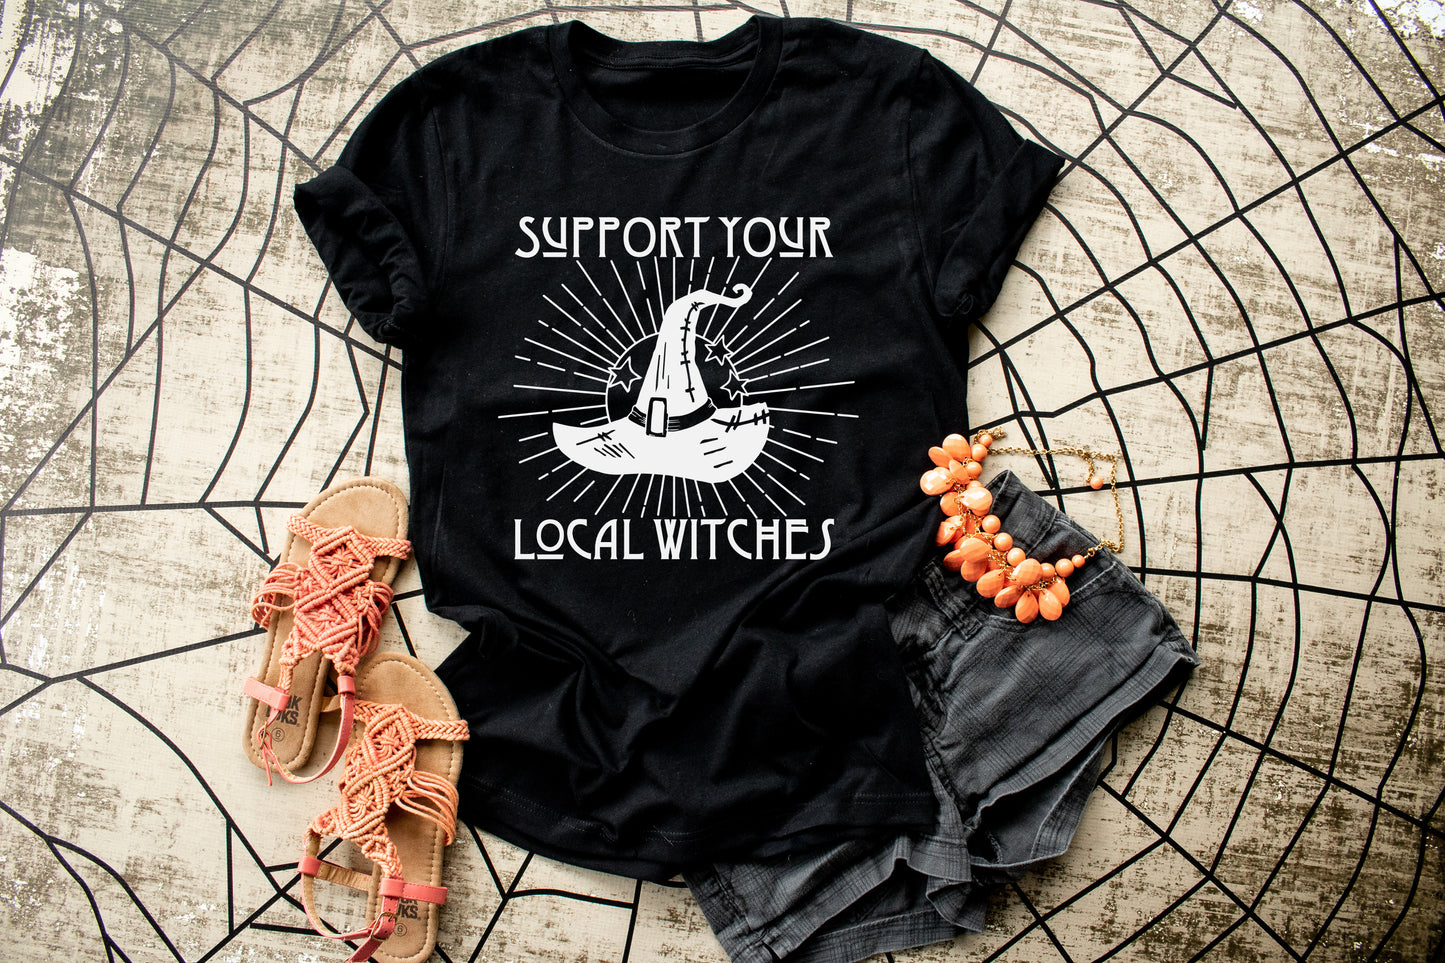 Support Your Local Witches-White (HIGH HEAT) #10-139